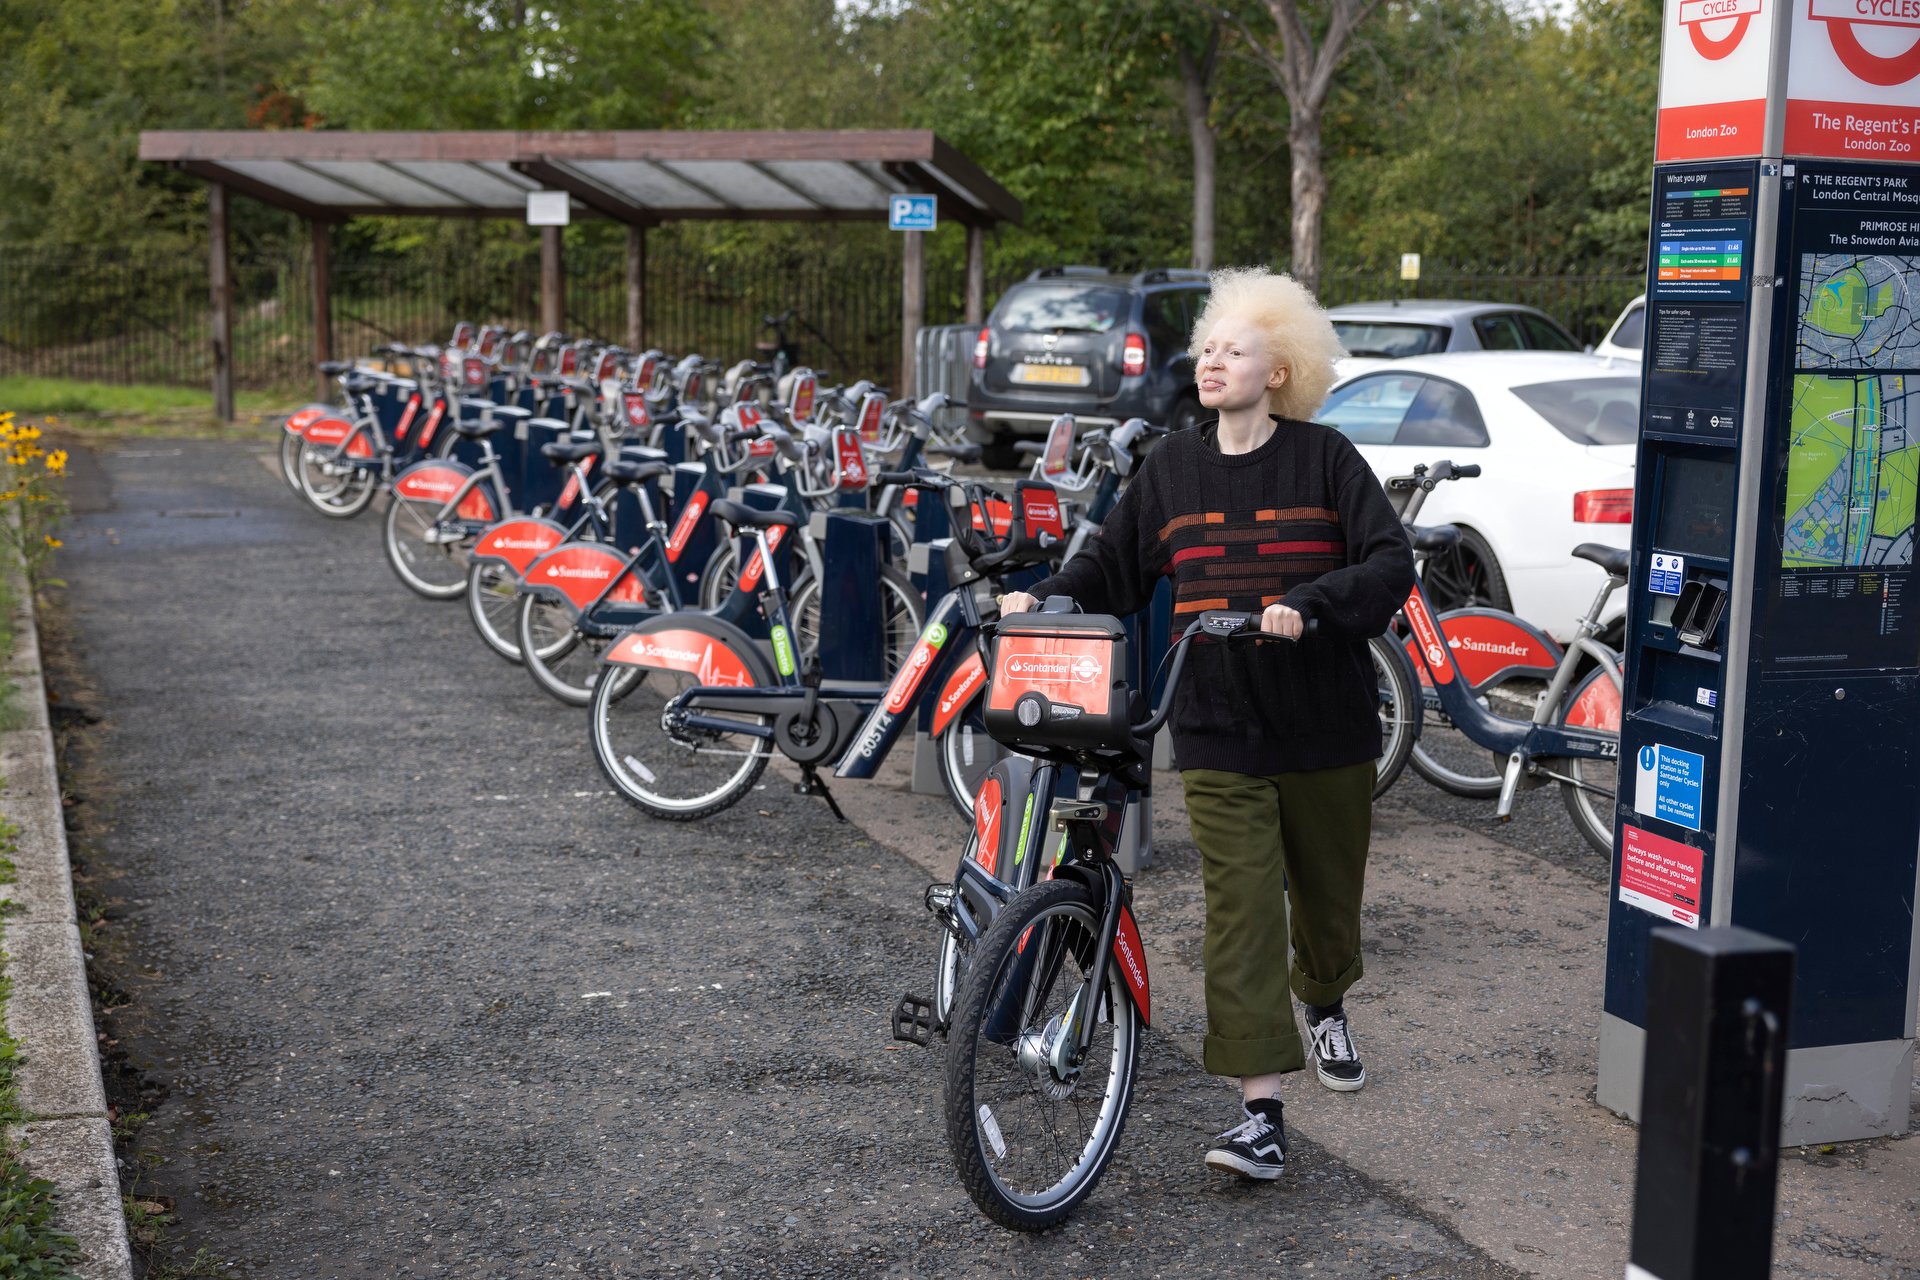 Docked e-bikes now available for hire as part of London’s record-breaking Santander Cycles scheme